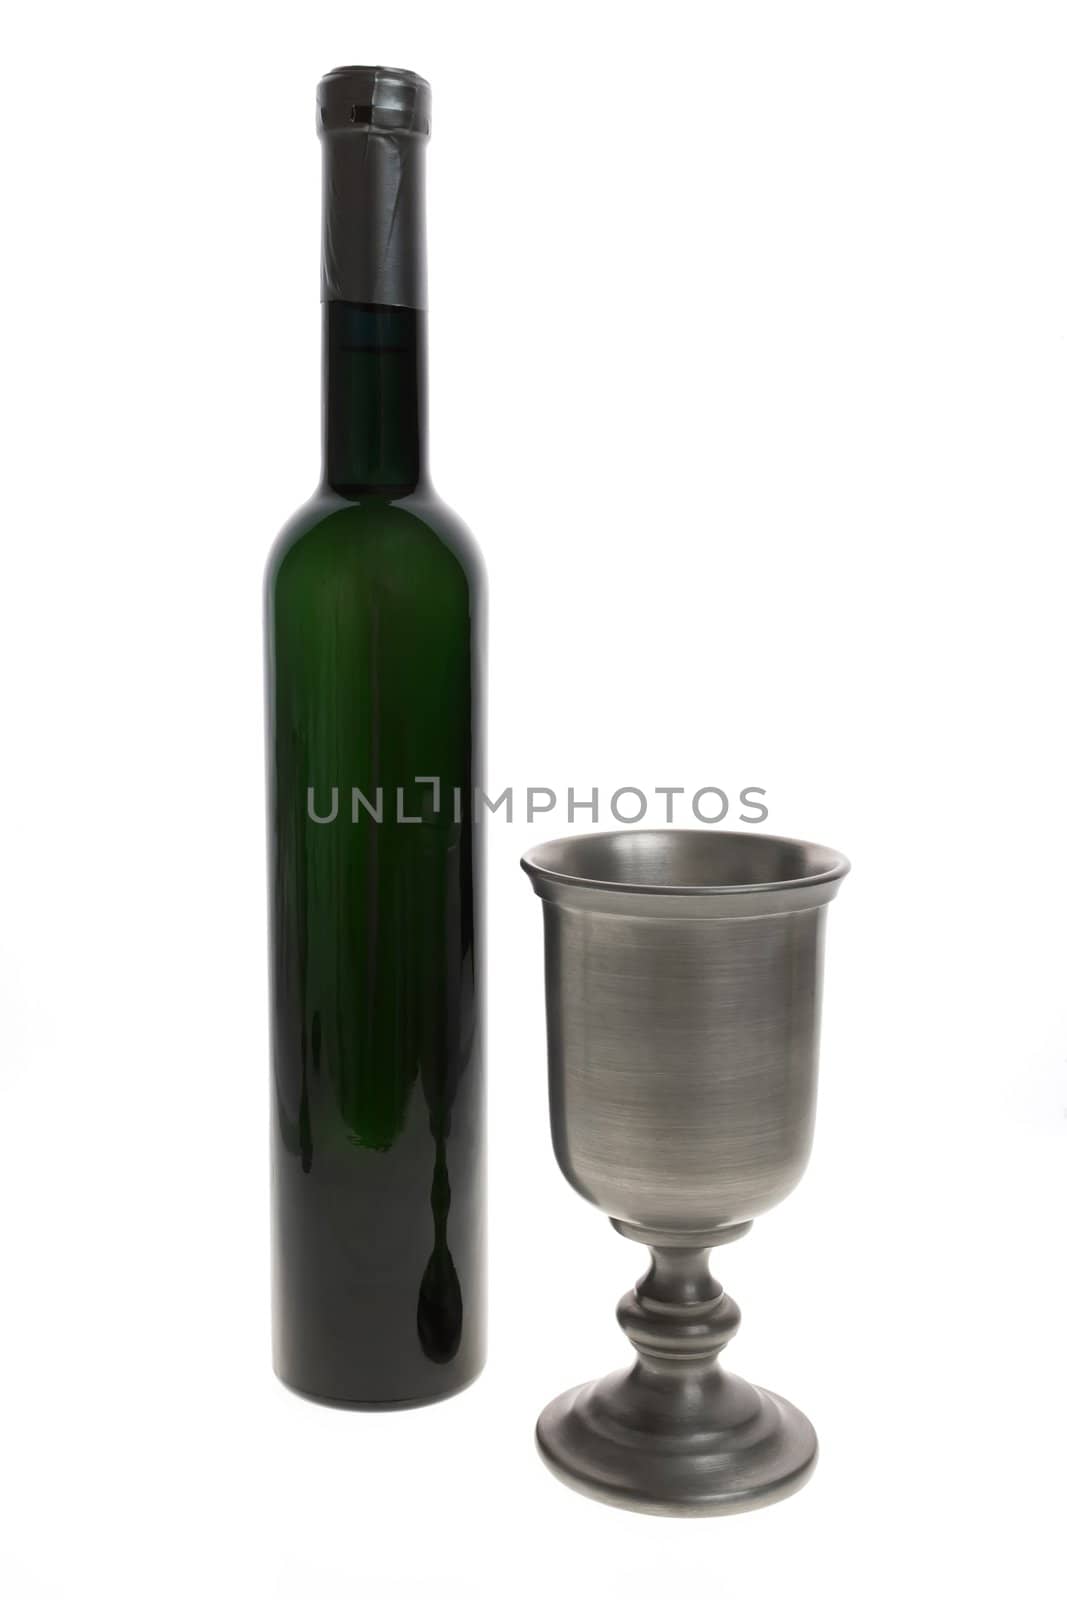 Silver wine goblet and bottle isolated on white background.